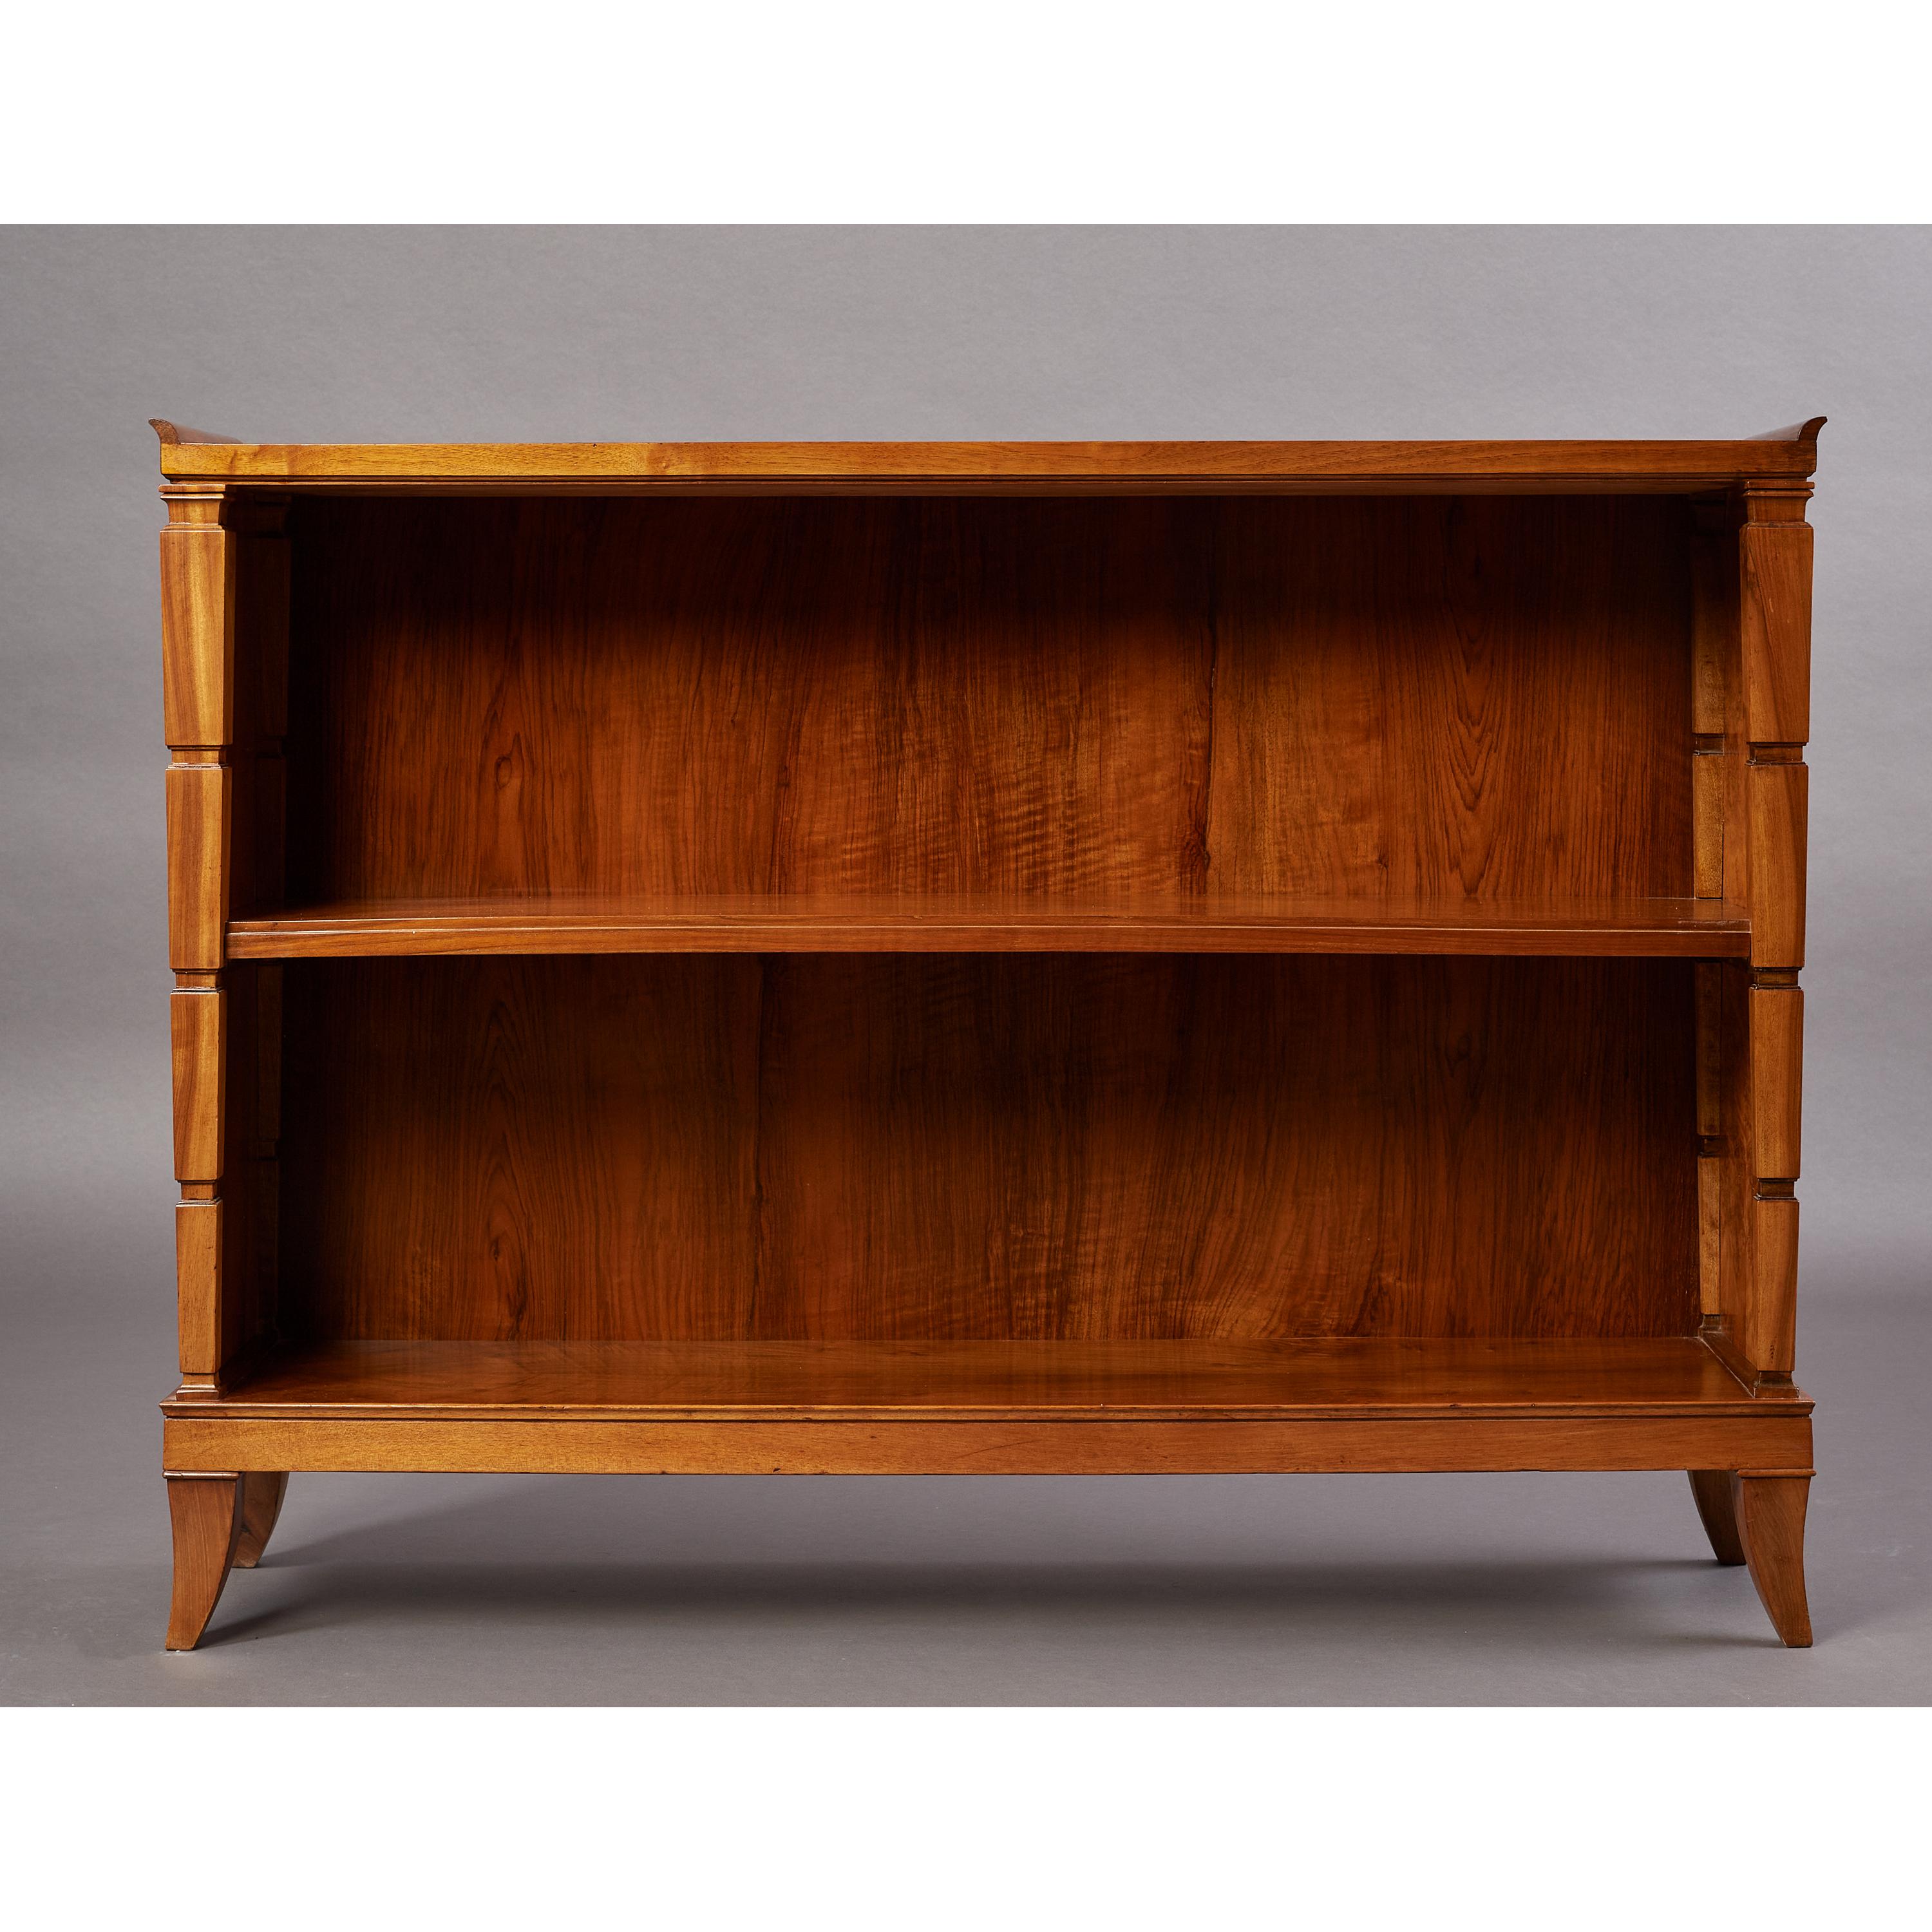 Mid-Century Modern Display Cabinet or Bookcase, School of Gio Ponti and Emilio Lancia, Italy 1940's